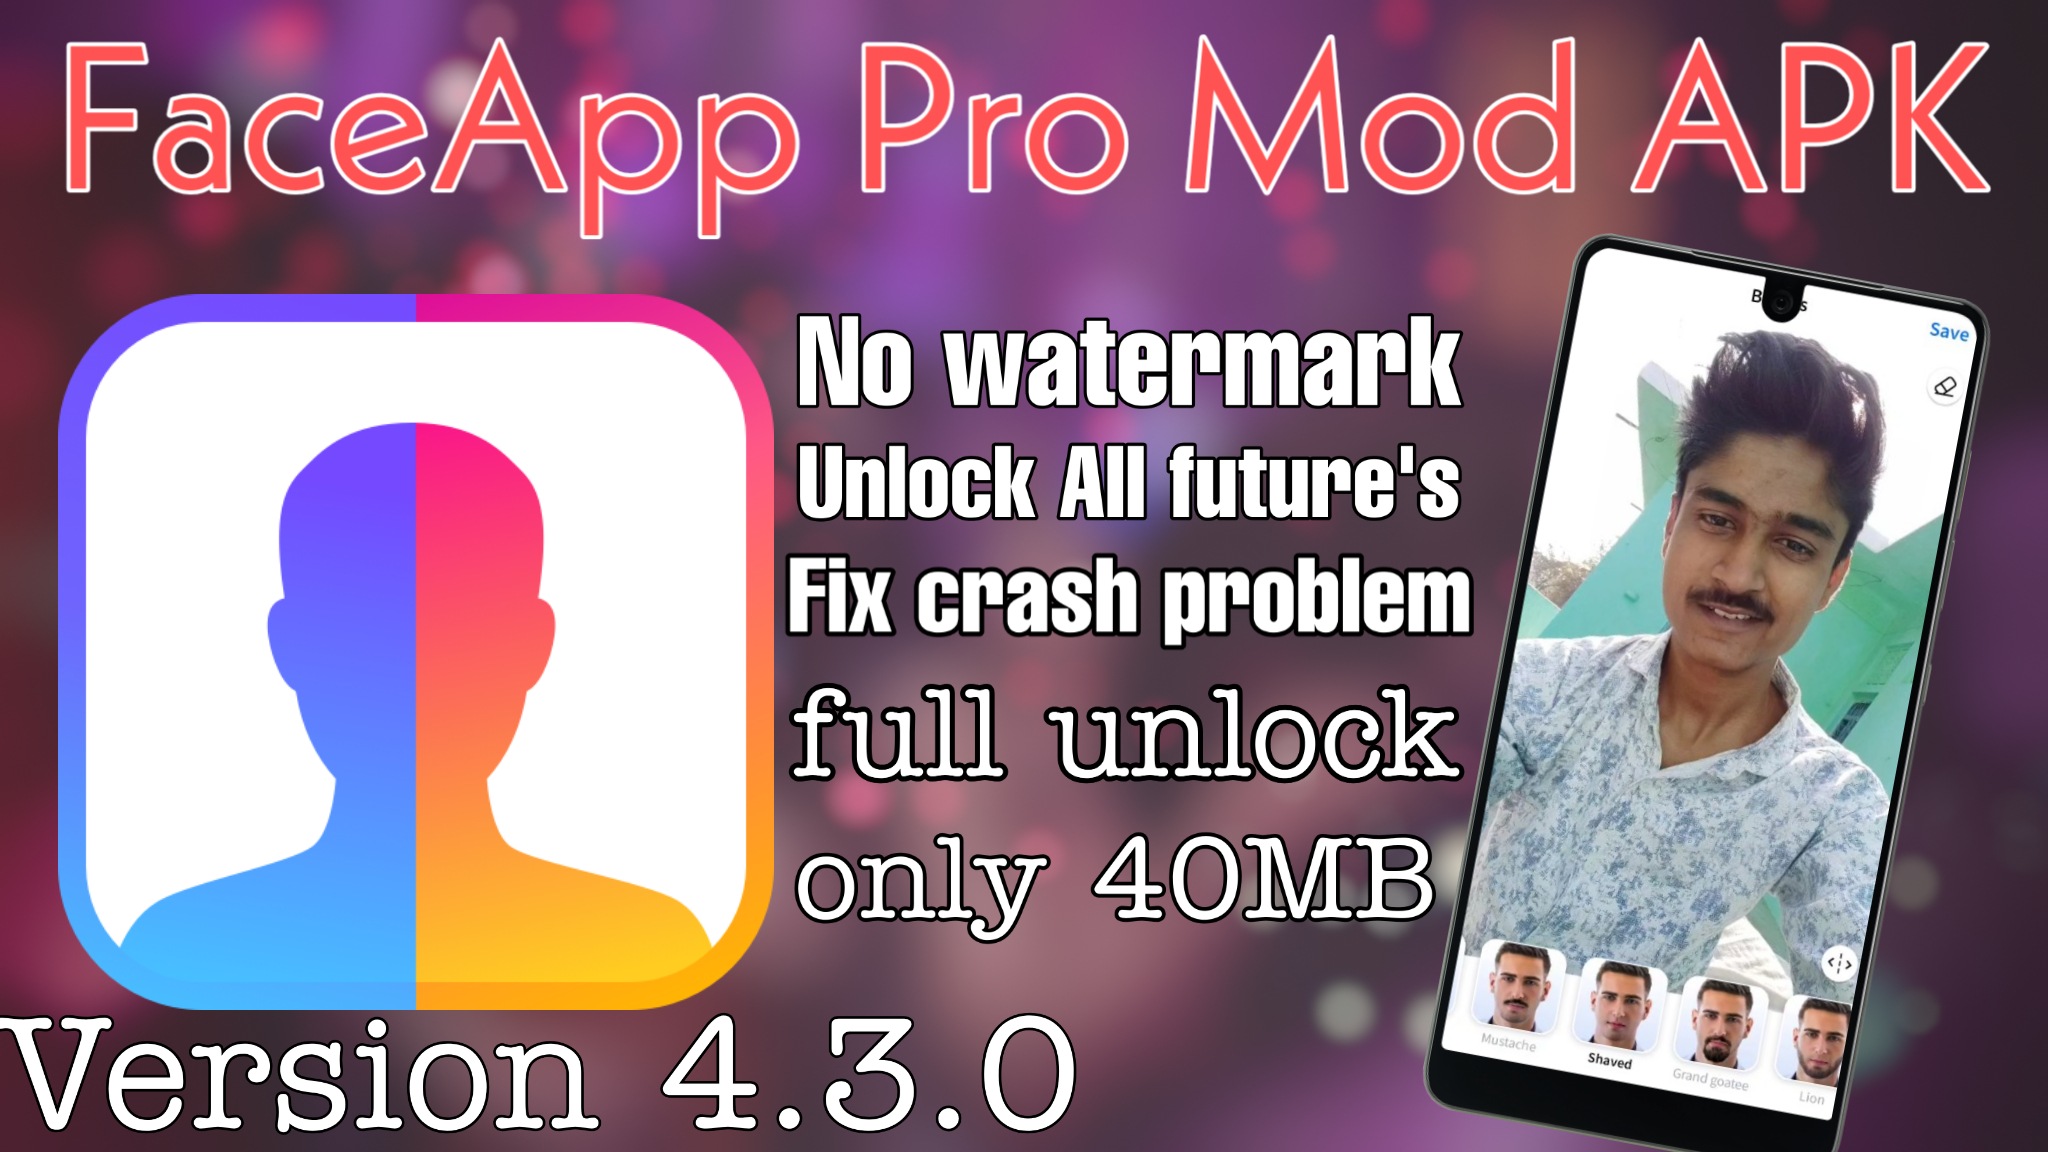 FaceApp Pro mod apk Unlocked all features v4.3.0  Direct link in